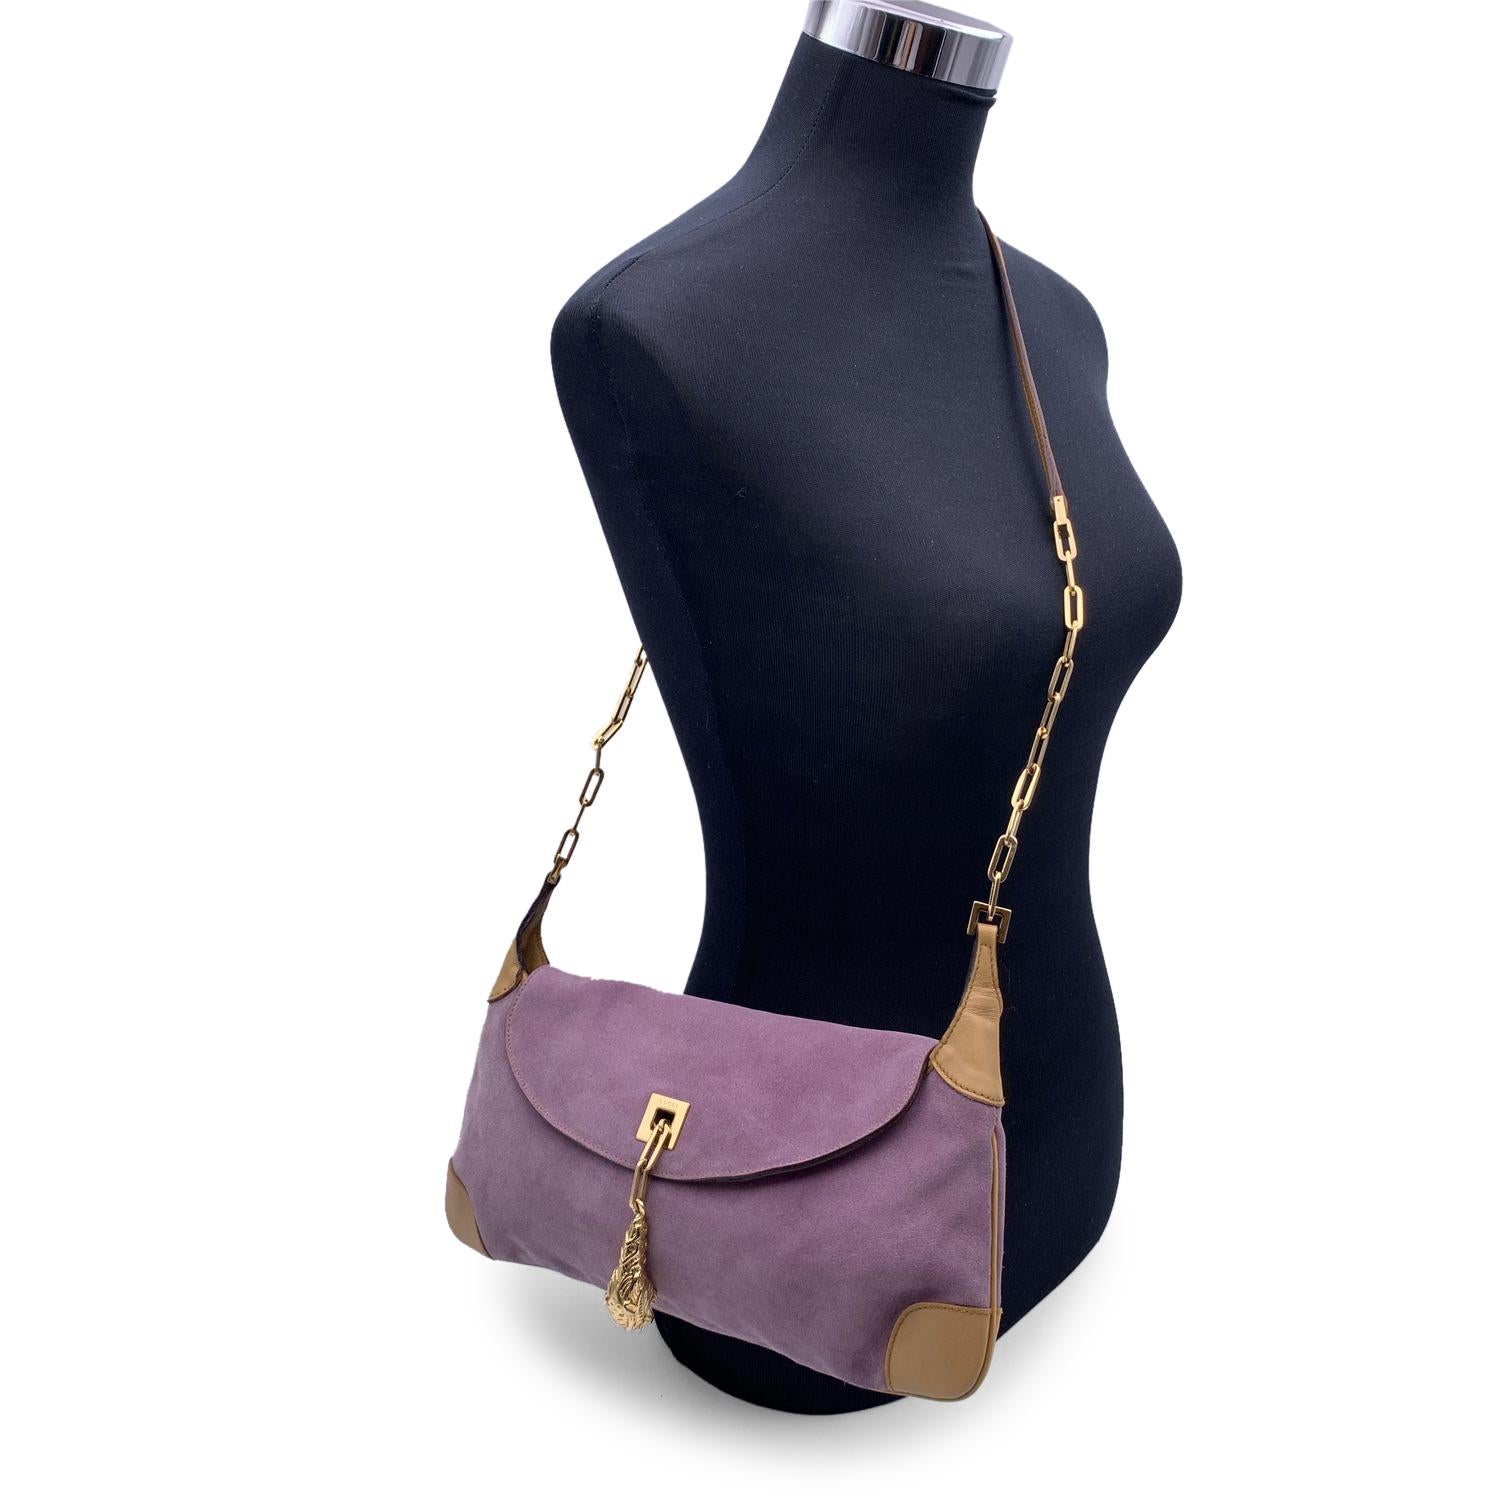 Beautiful Gucci lilac suede and beige leather shoulder bag, designed by Tom Ford. Gold metal tiger head pendant on the front. Gold metal and leather shoulder strap. Beige fabric lining. 1 side zip pocket inside. Horsebit detailing on the sides.